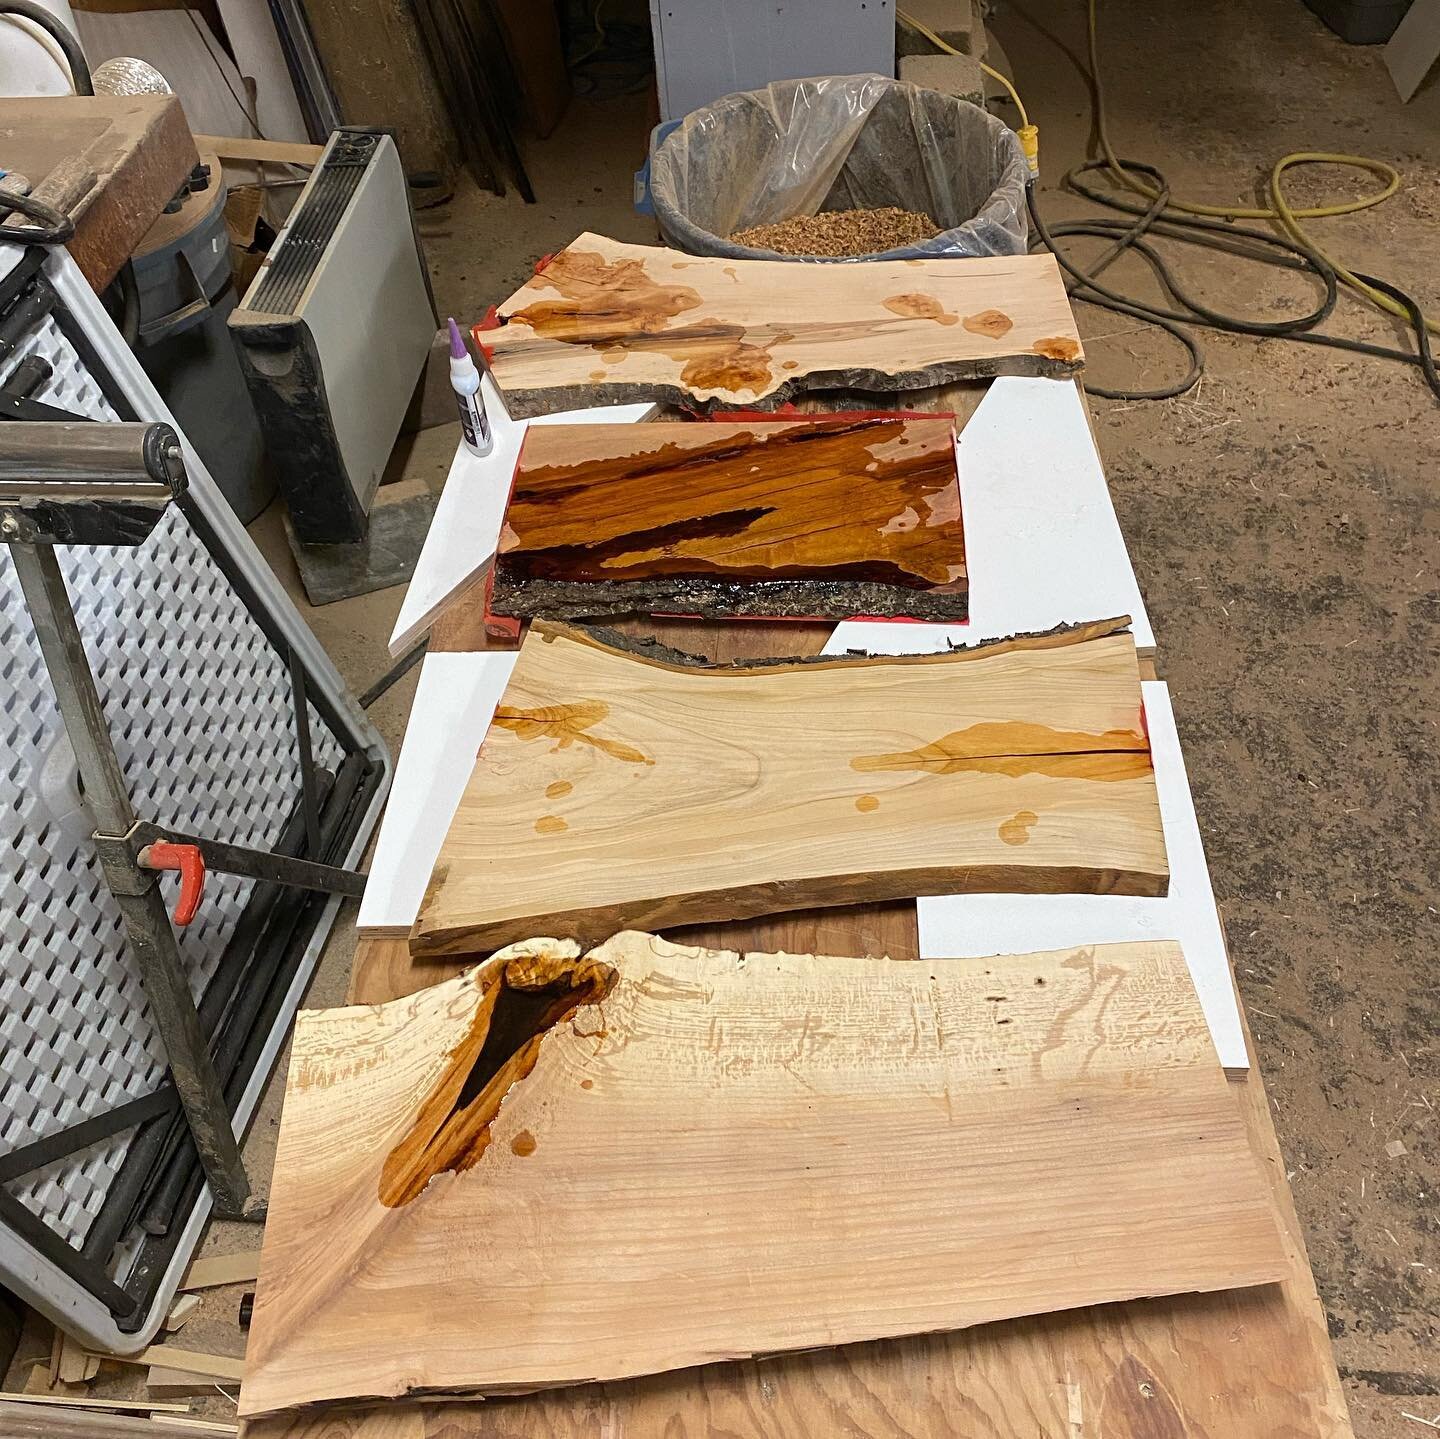 Doing a little crack filling on some charcuterie stock (coming to our website soon) and some pieces for a client. #charcuterieboard #charcuterie #epoxy #karltaylorwood #walnut #alder #pear #cherry #furnituredesign